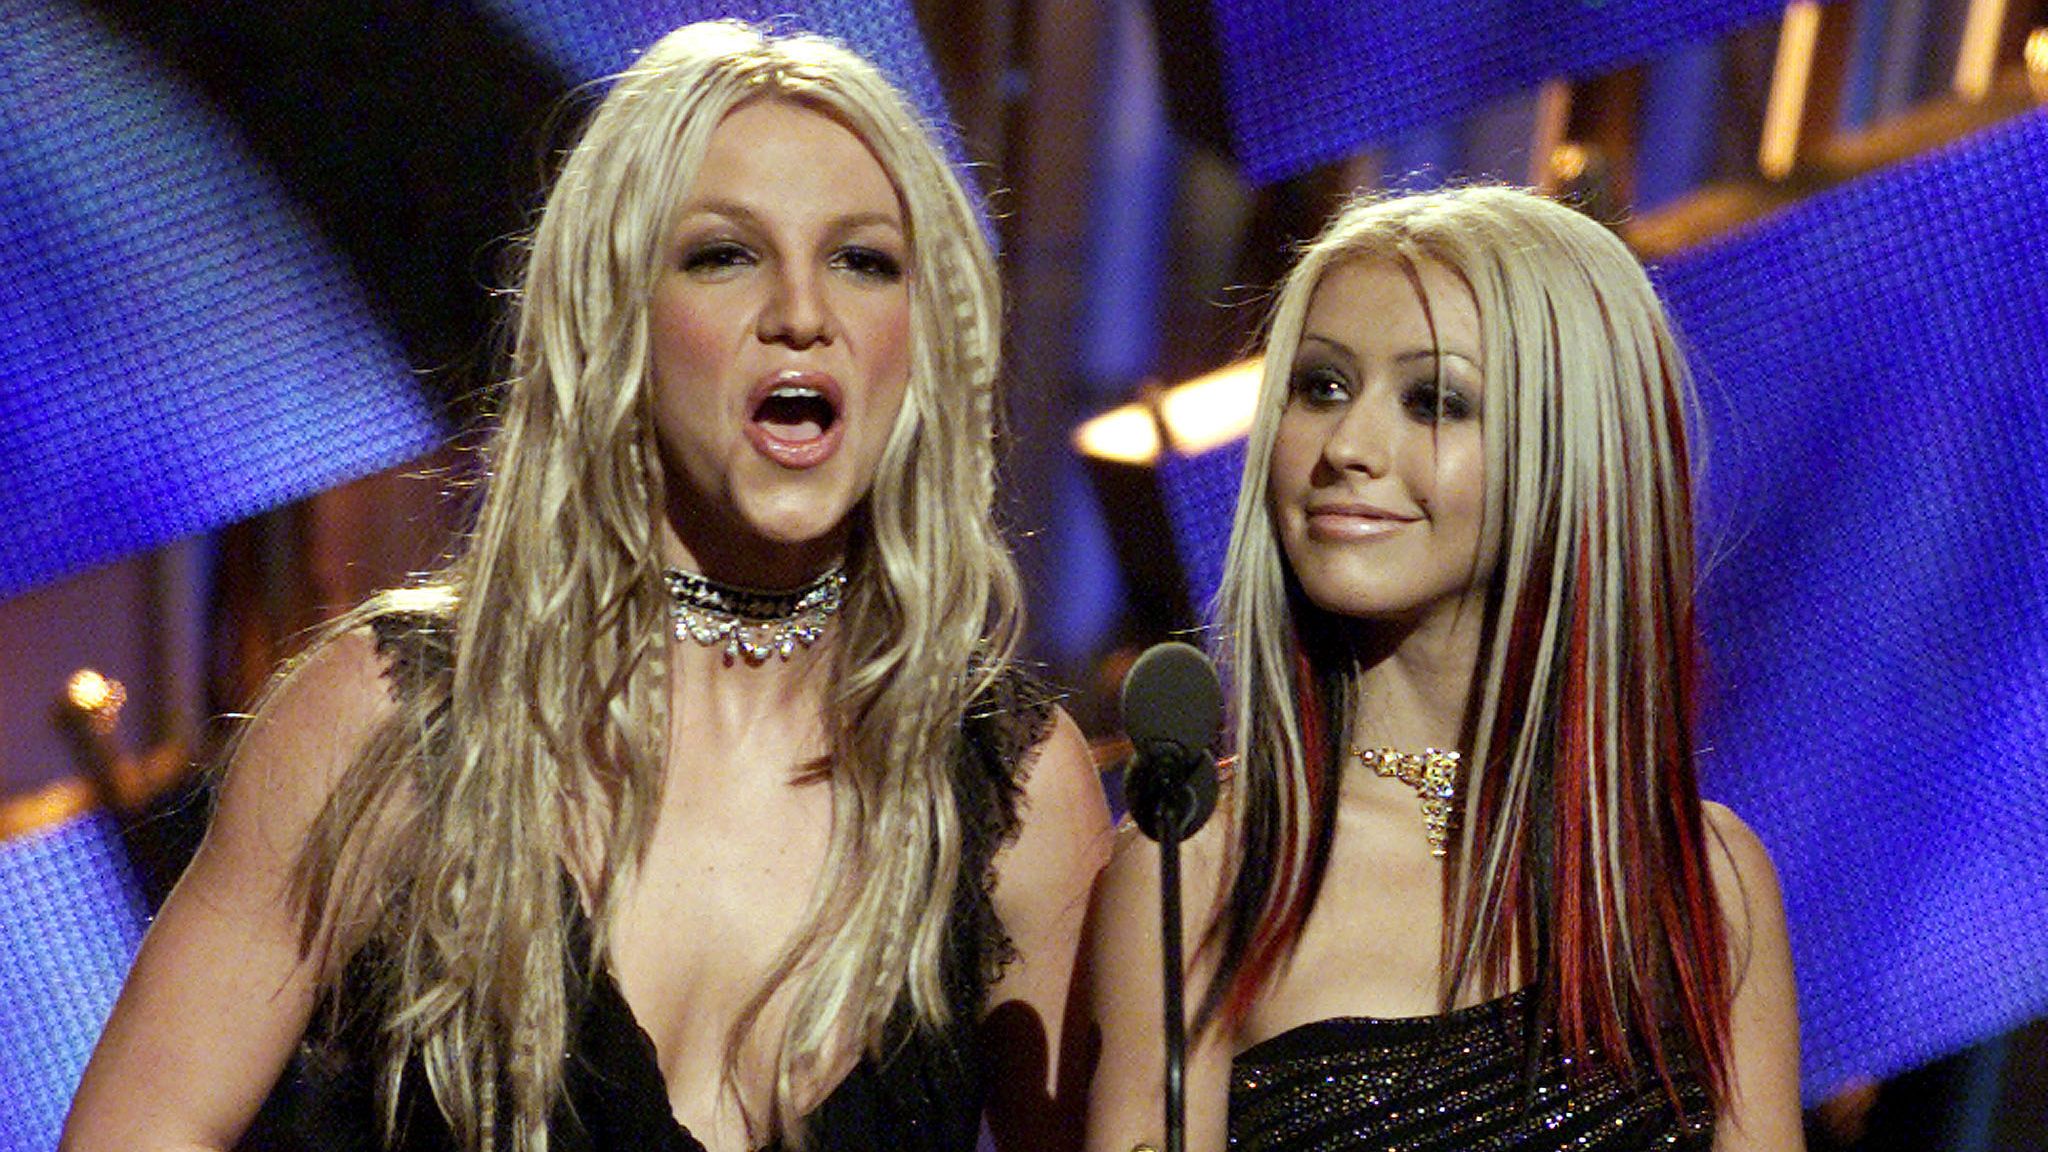 Britney Spears: Christina Aguilera shares message of support for star over conservatorship legal battle | Ents & Arts News | Sky News